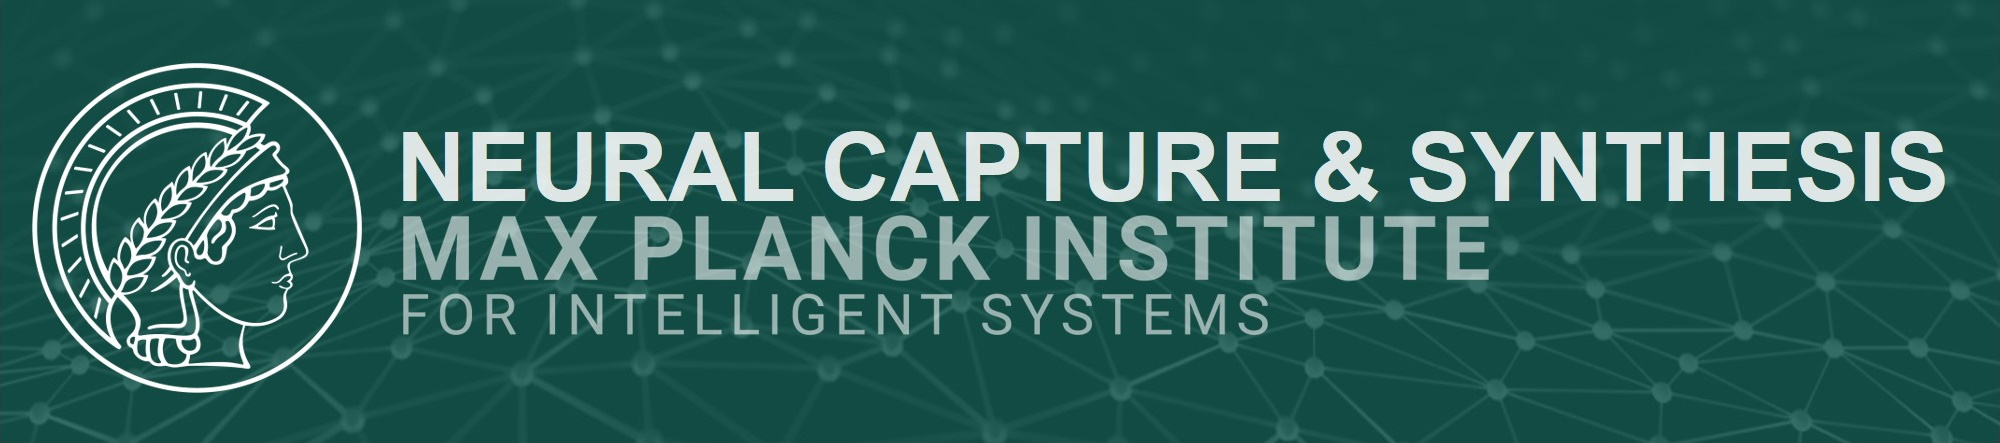 Neural Capture and Synthesis at the Max Planck Institute for Intelligent Systems